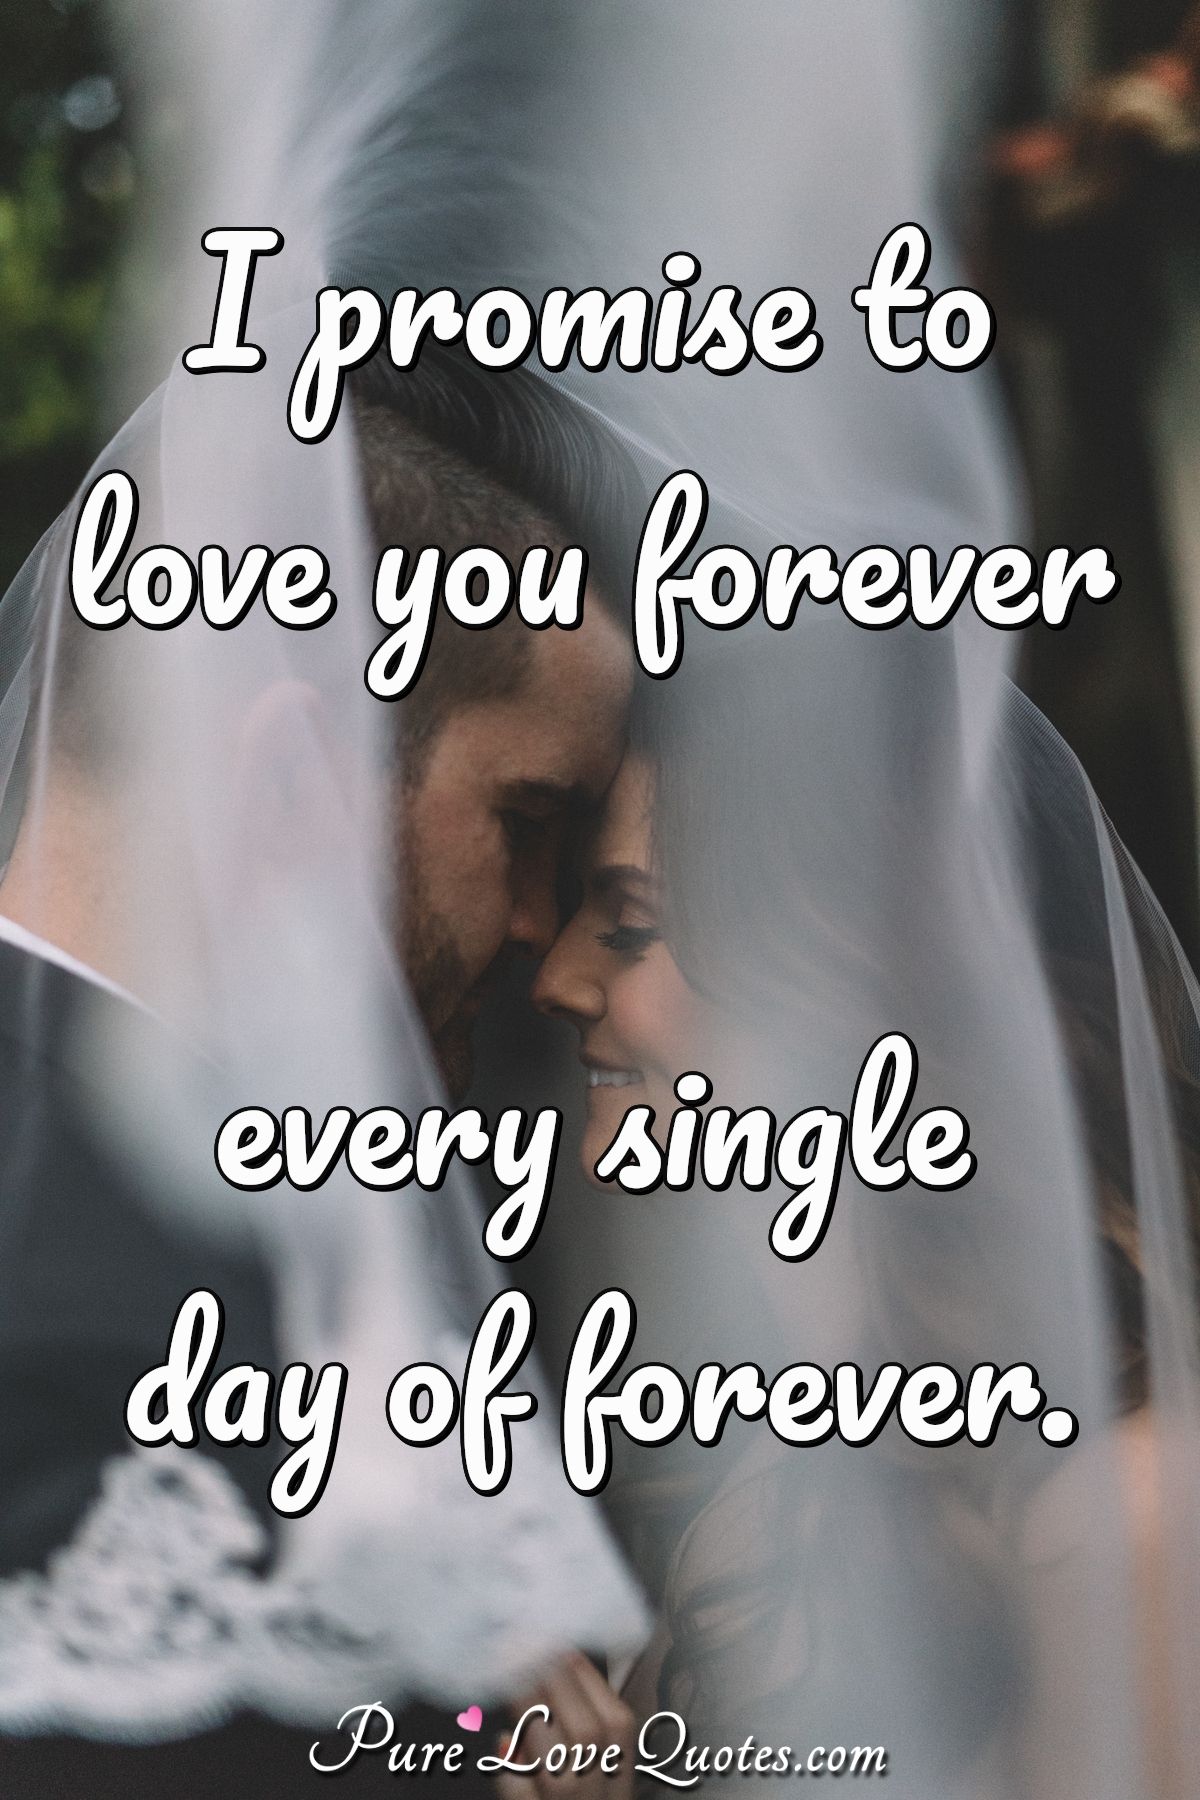 I Love You Forever Images Hd